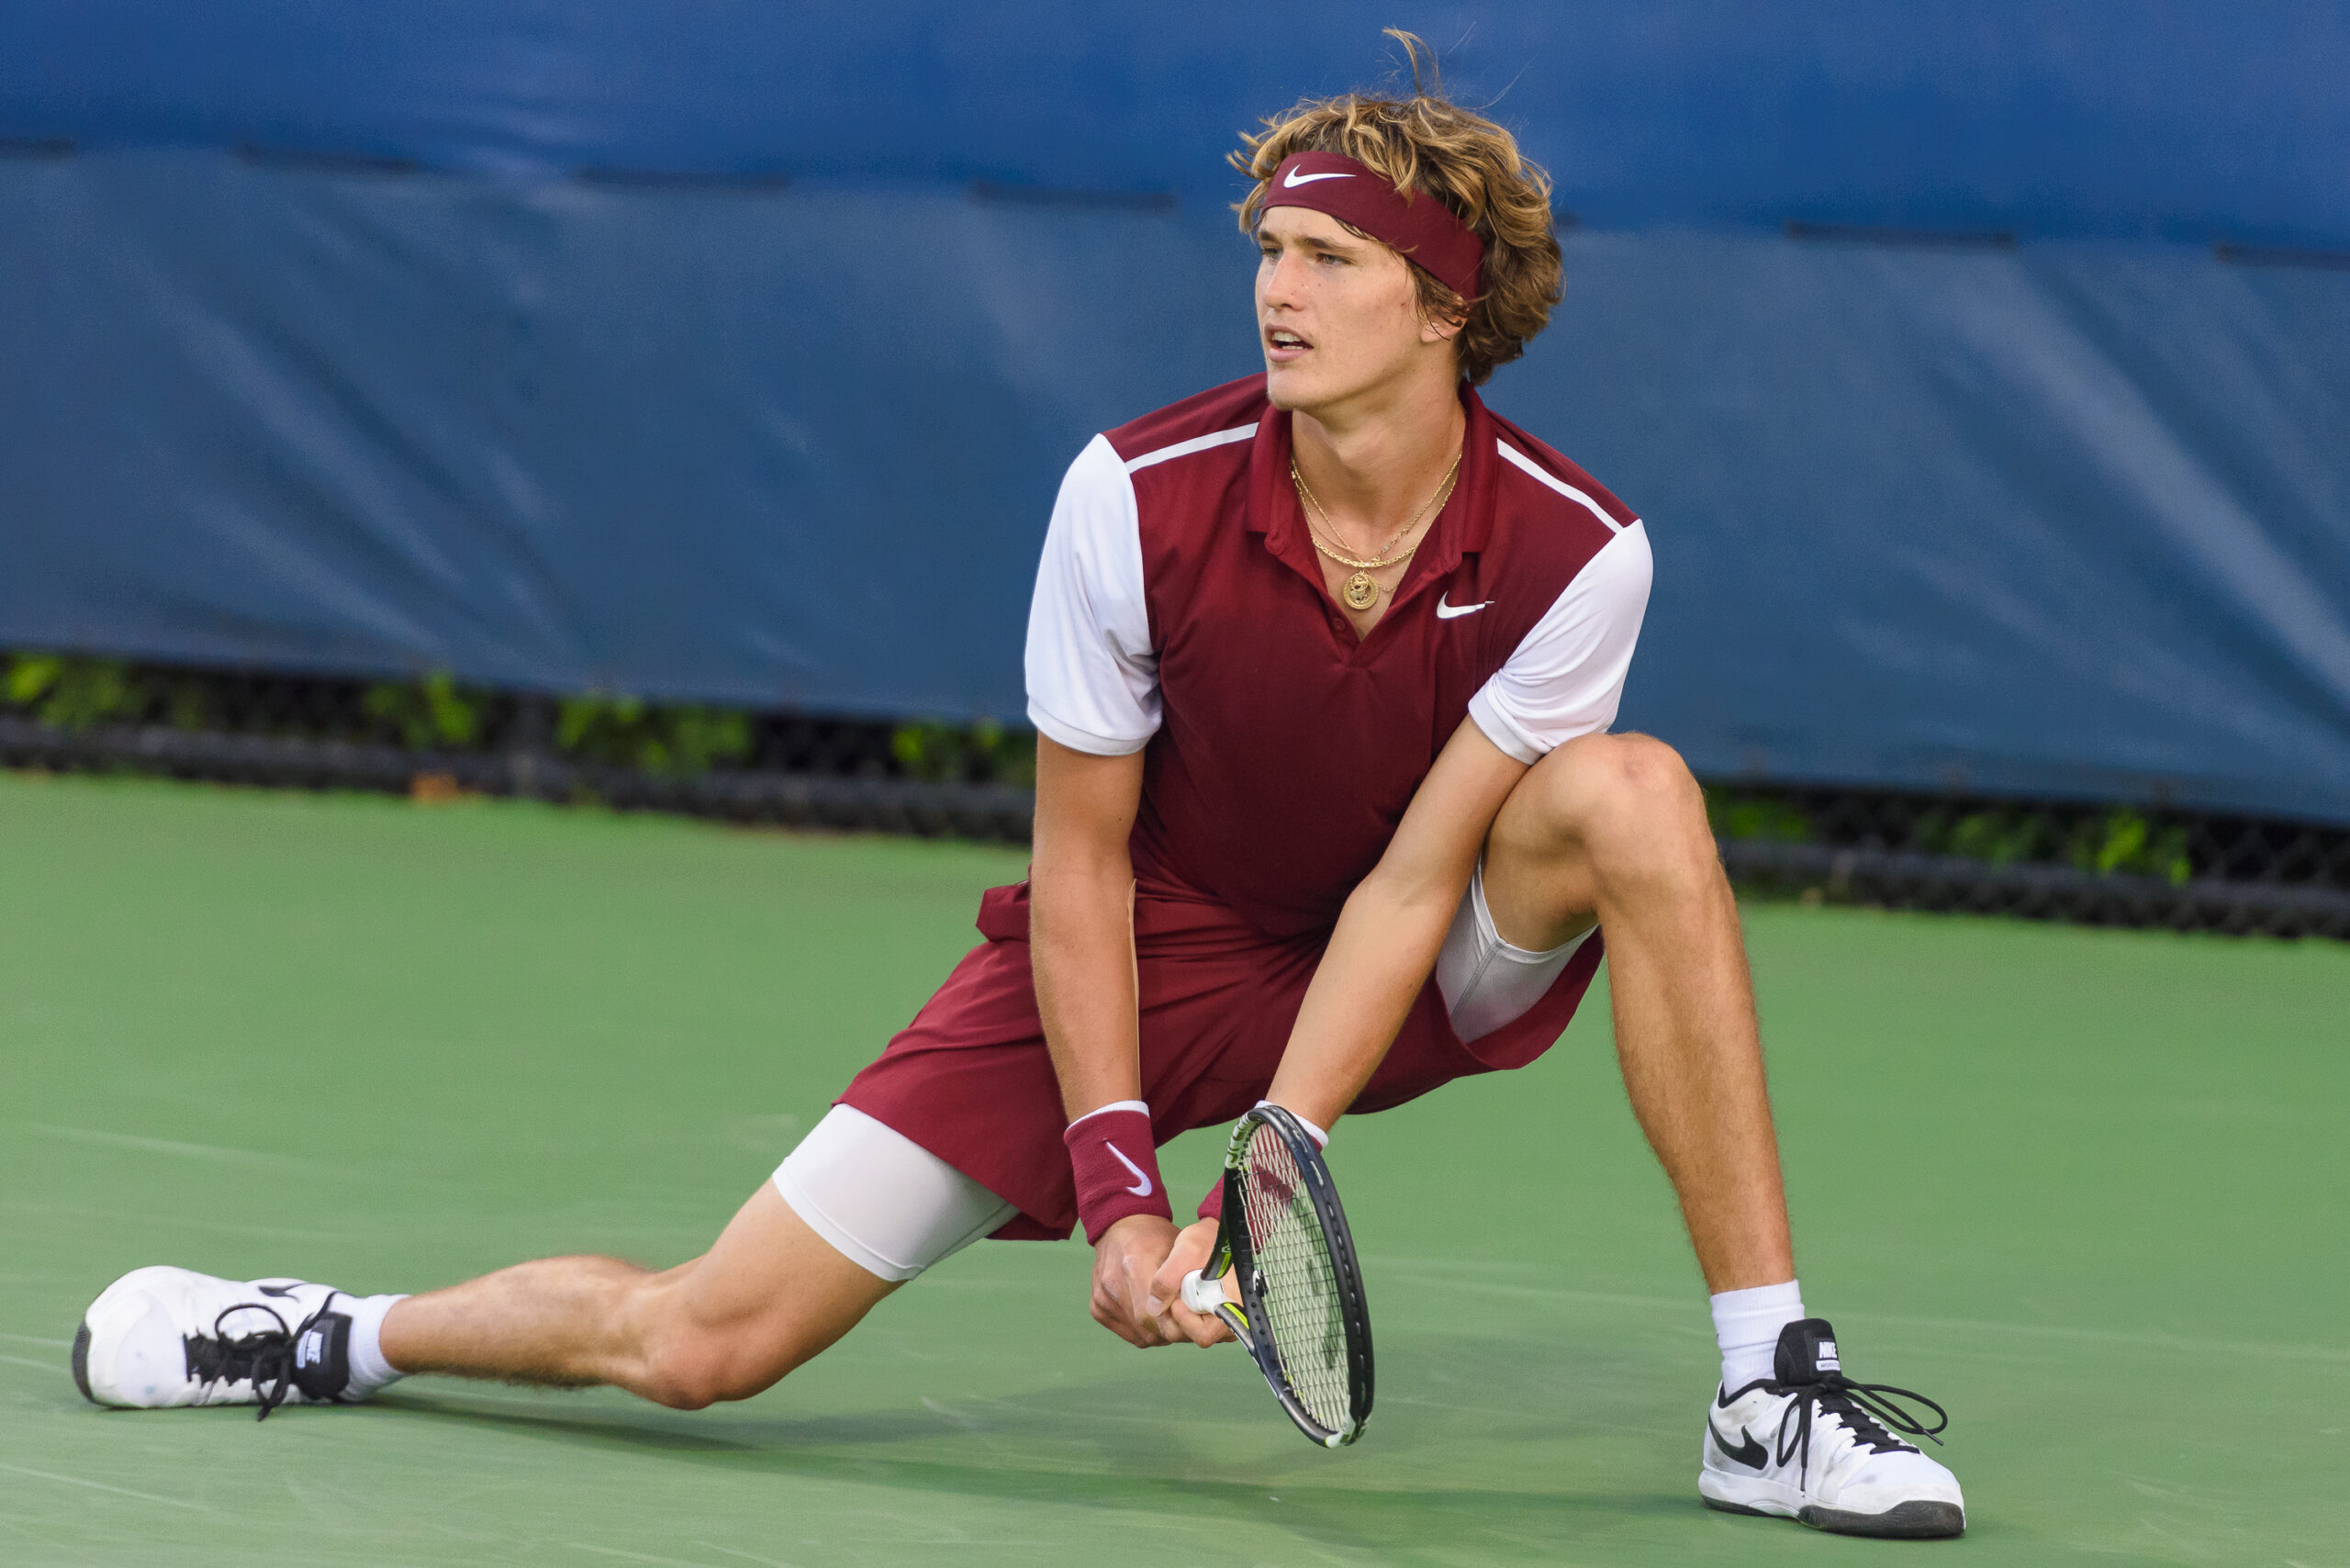 Alexander Zverev ejected from Mexican Open for a doubles match outburst